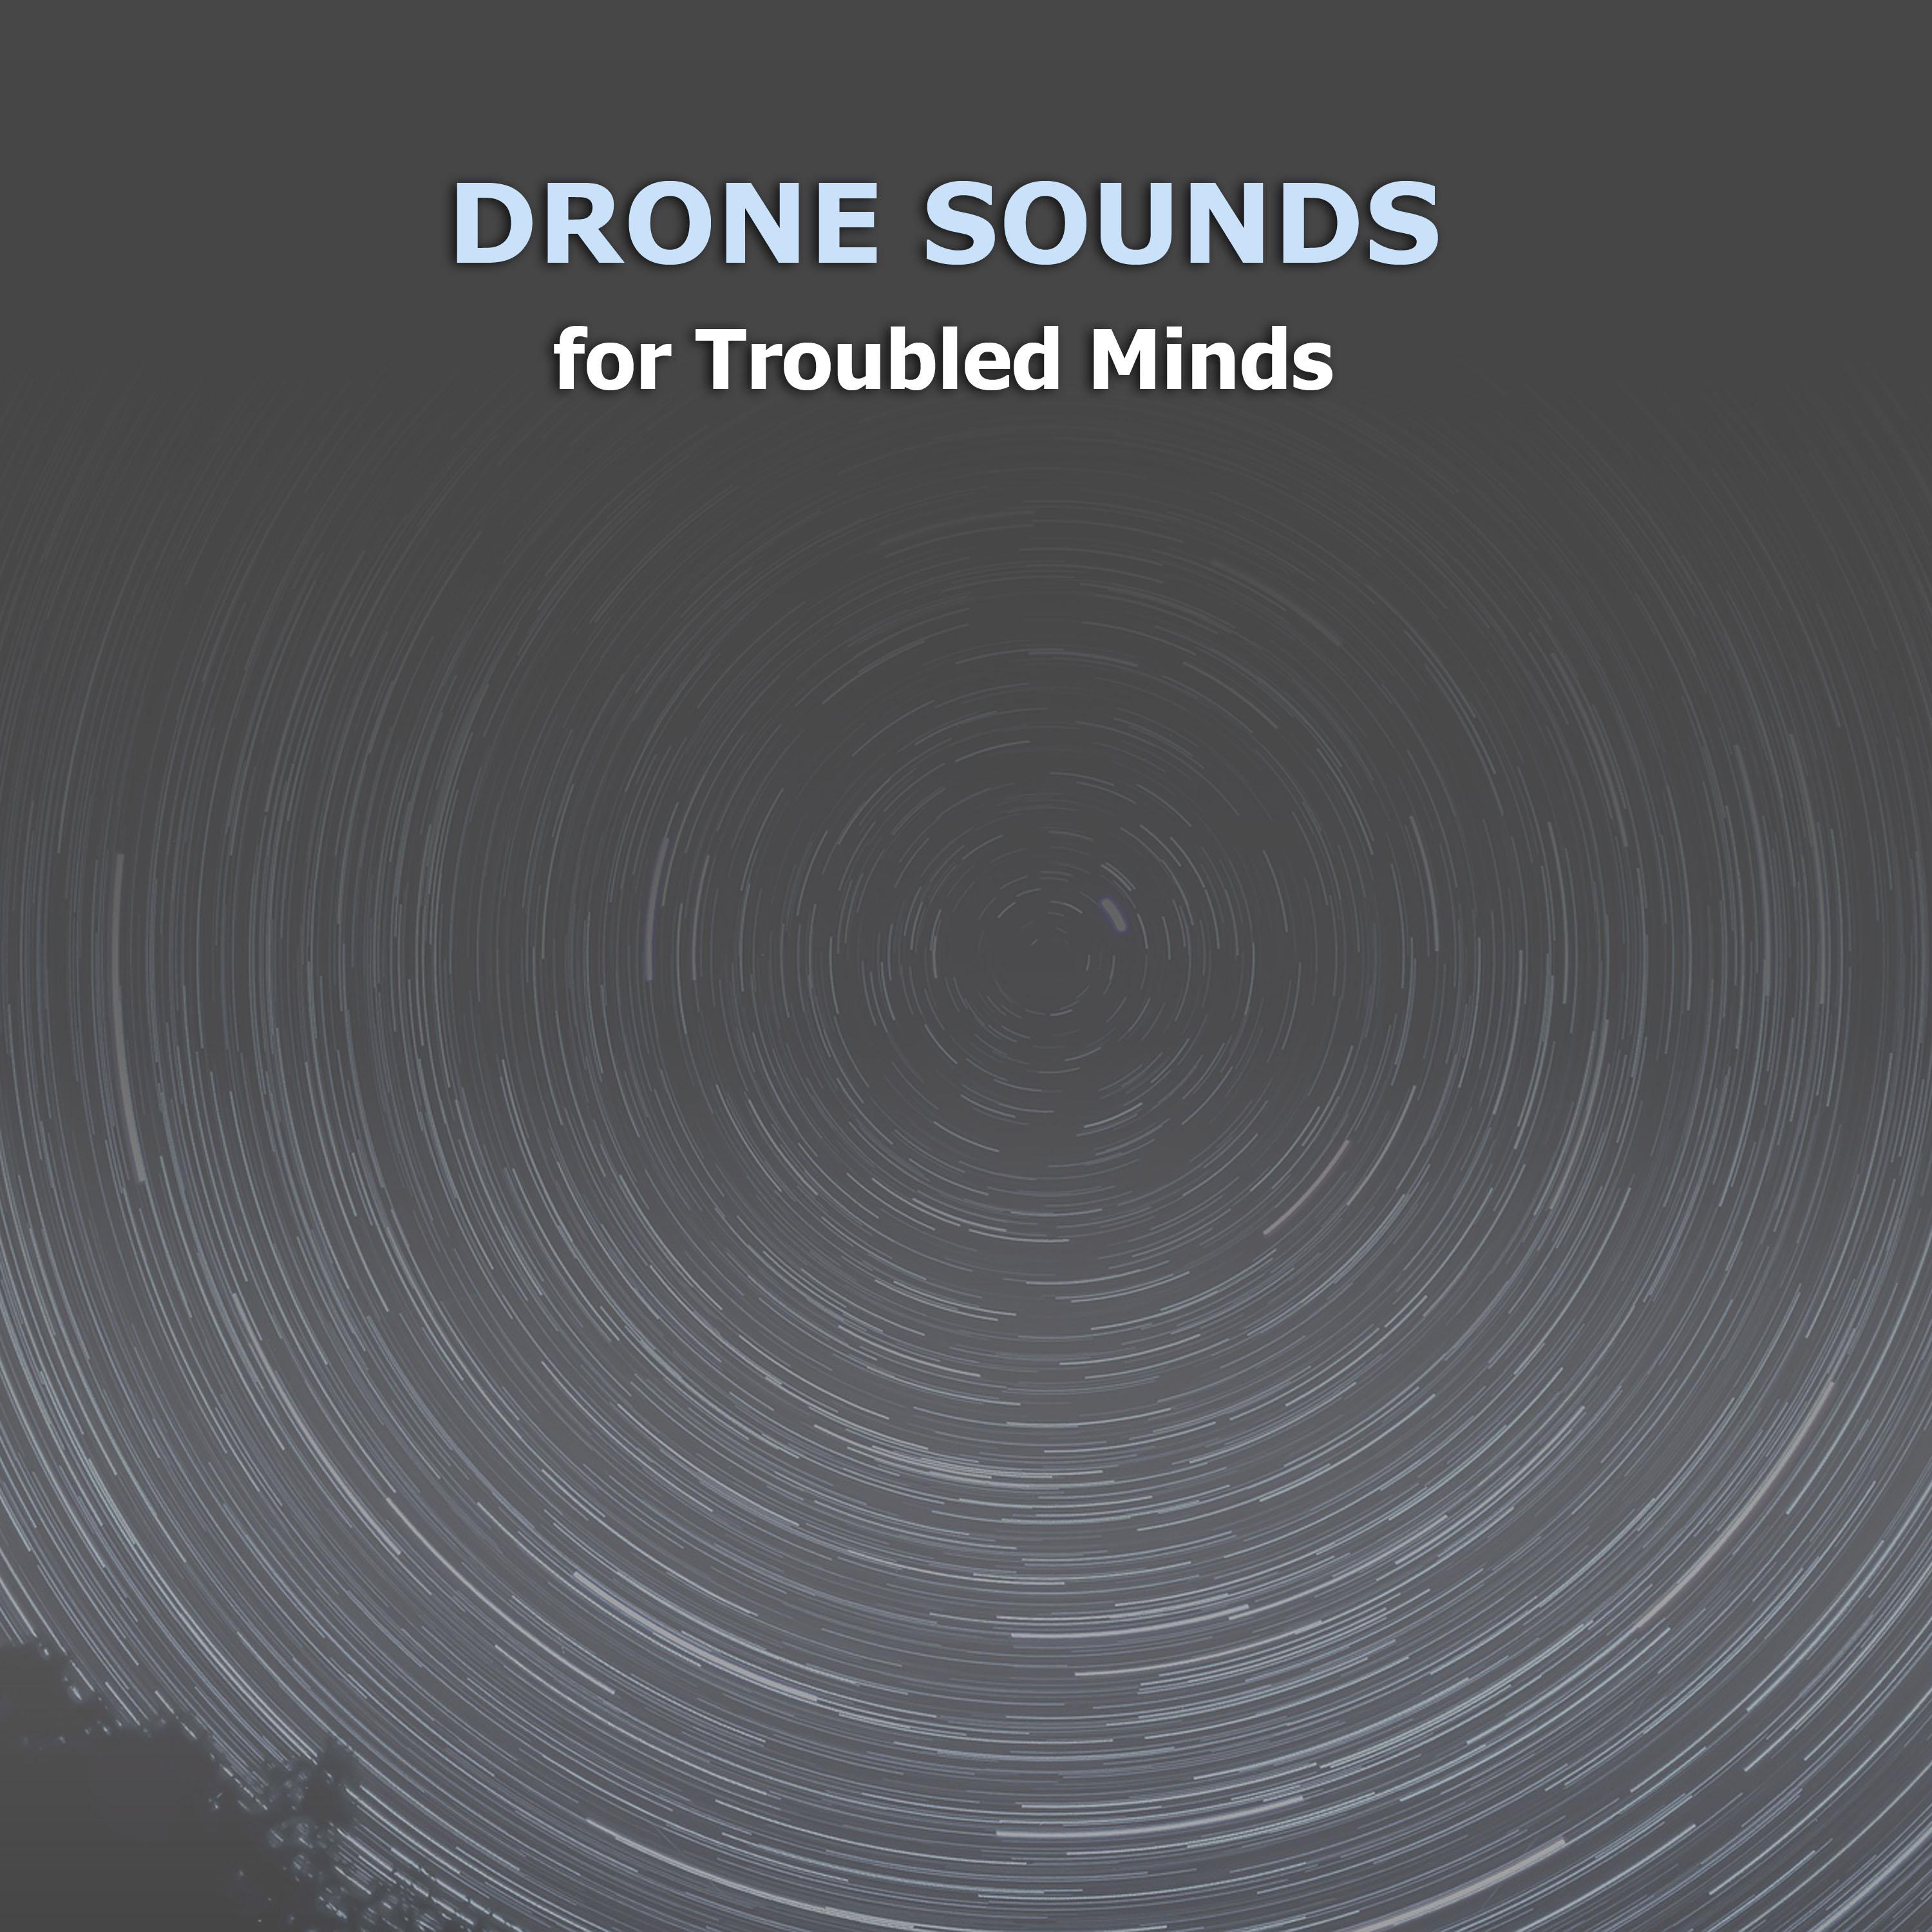 14 Collection of Binaural Sounds to Loop